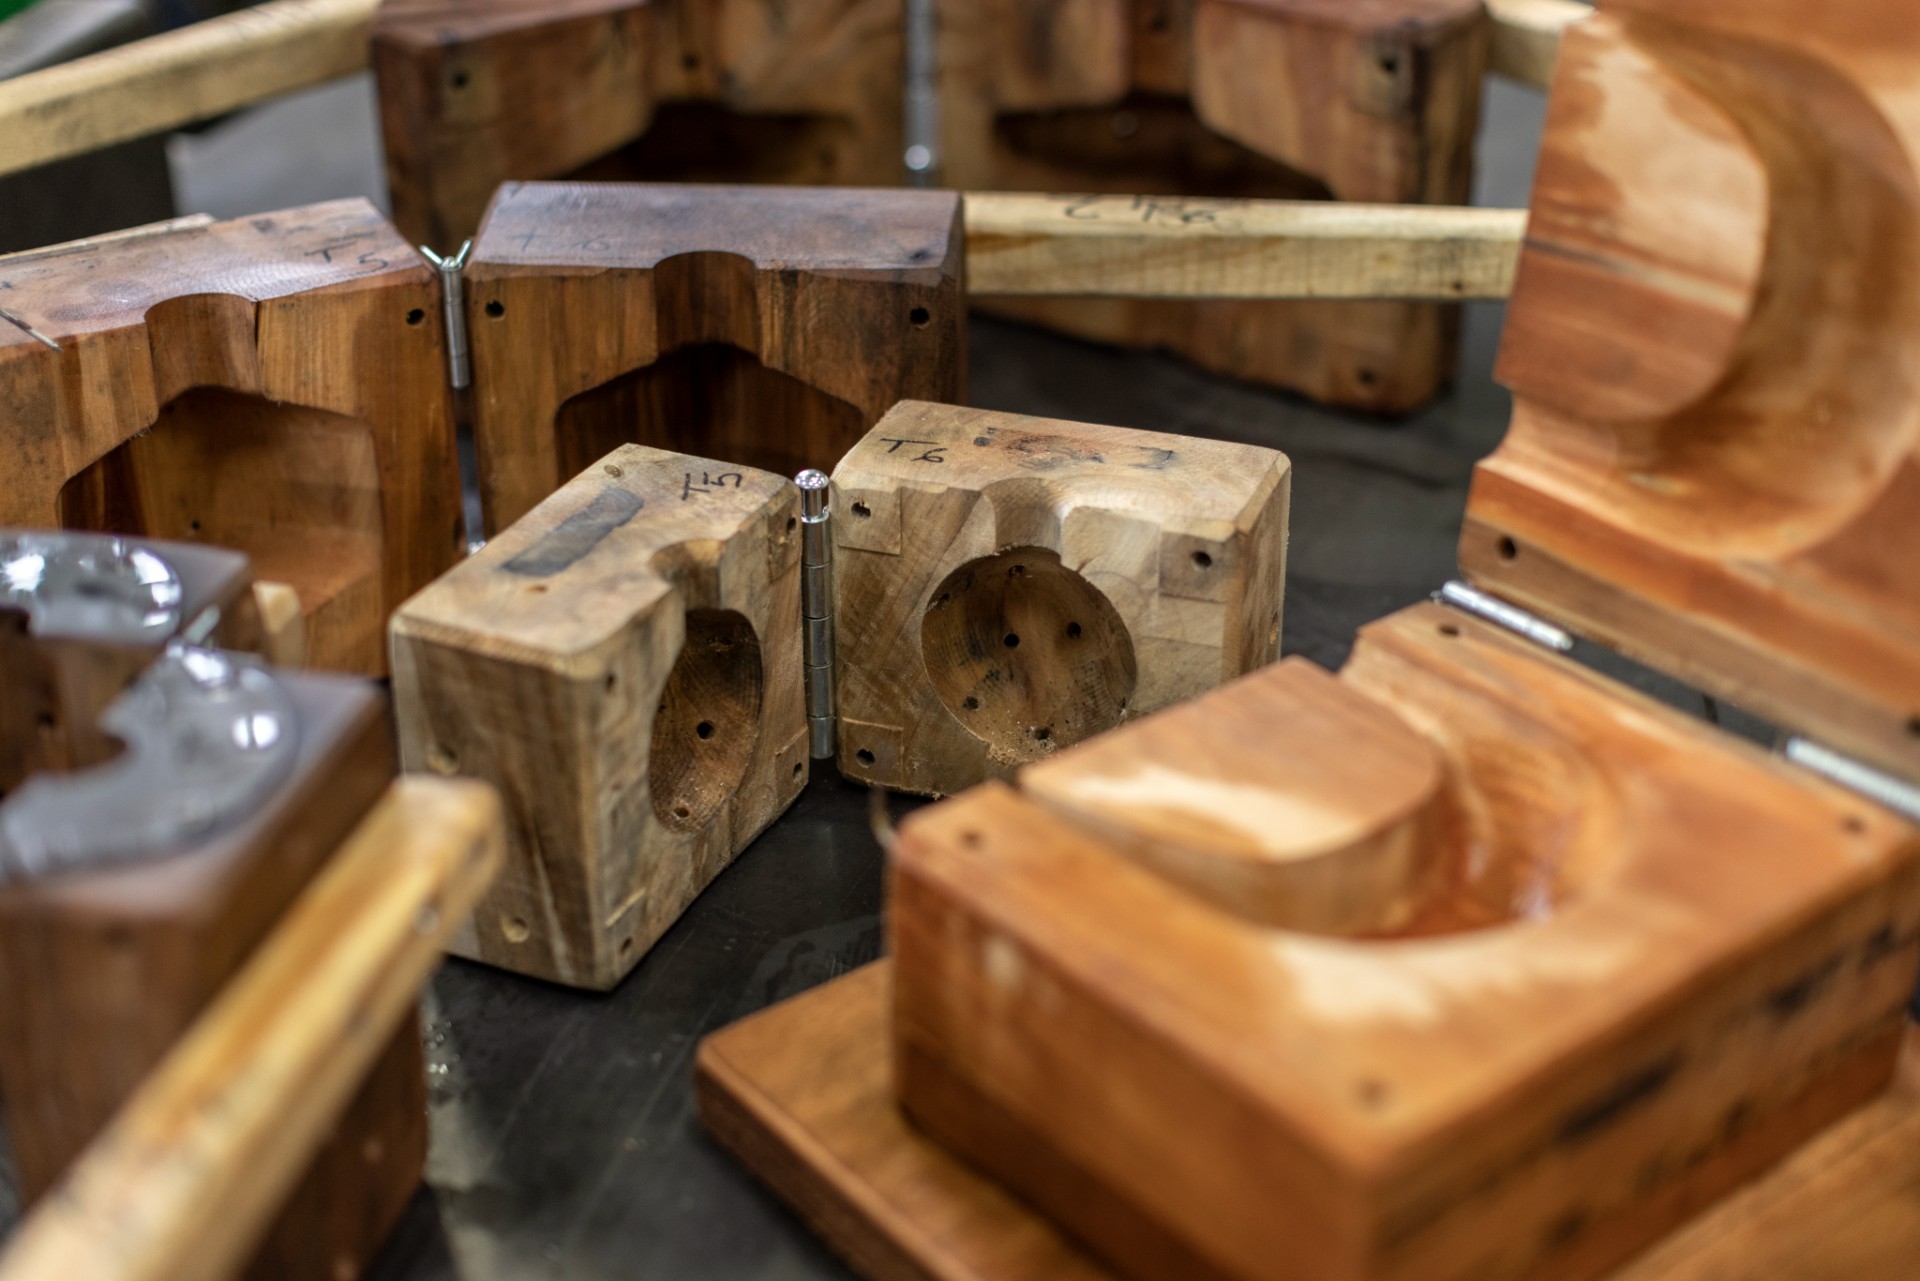 Wooden molds